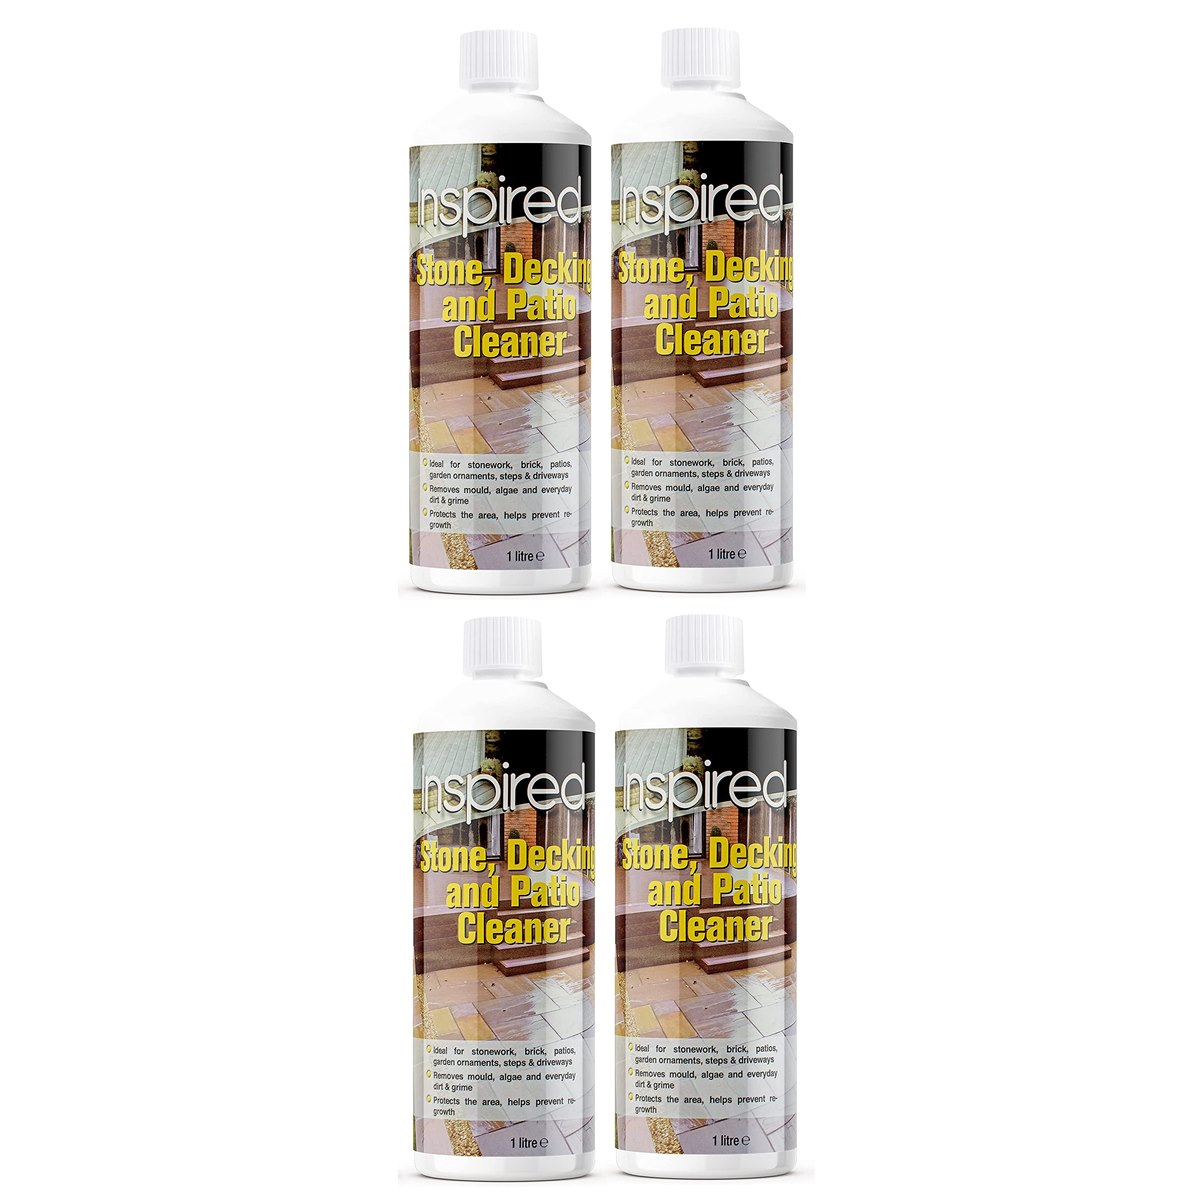 Case of 4 x Inspired Stone Decking and Patio Cleaner 1 Litre